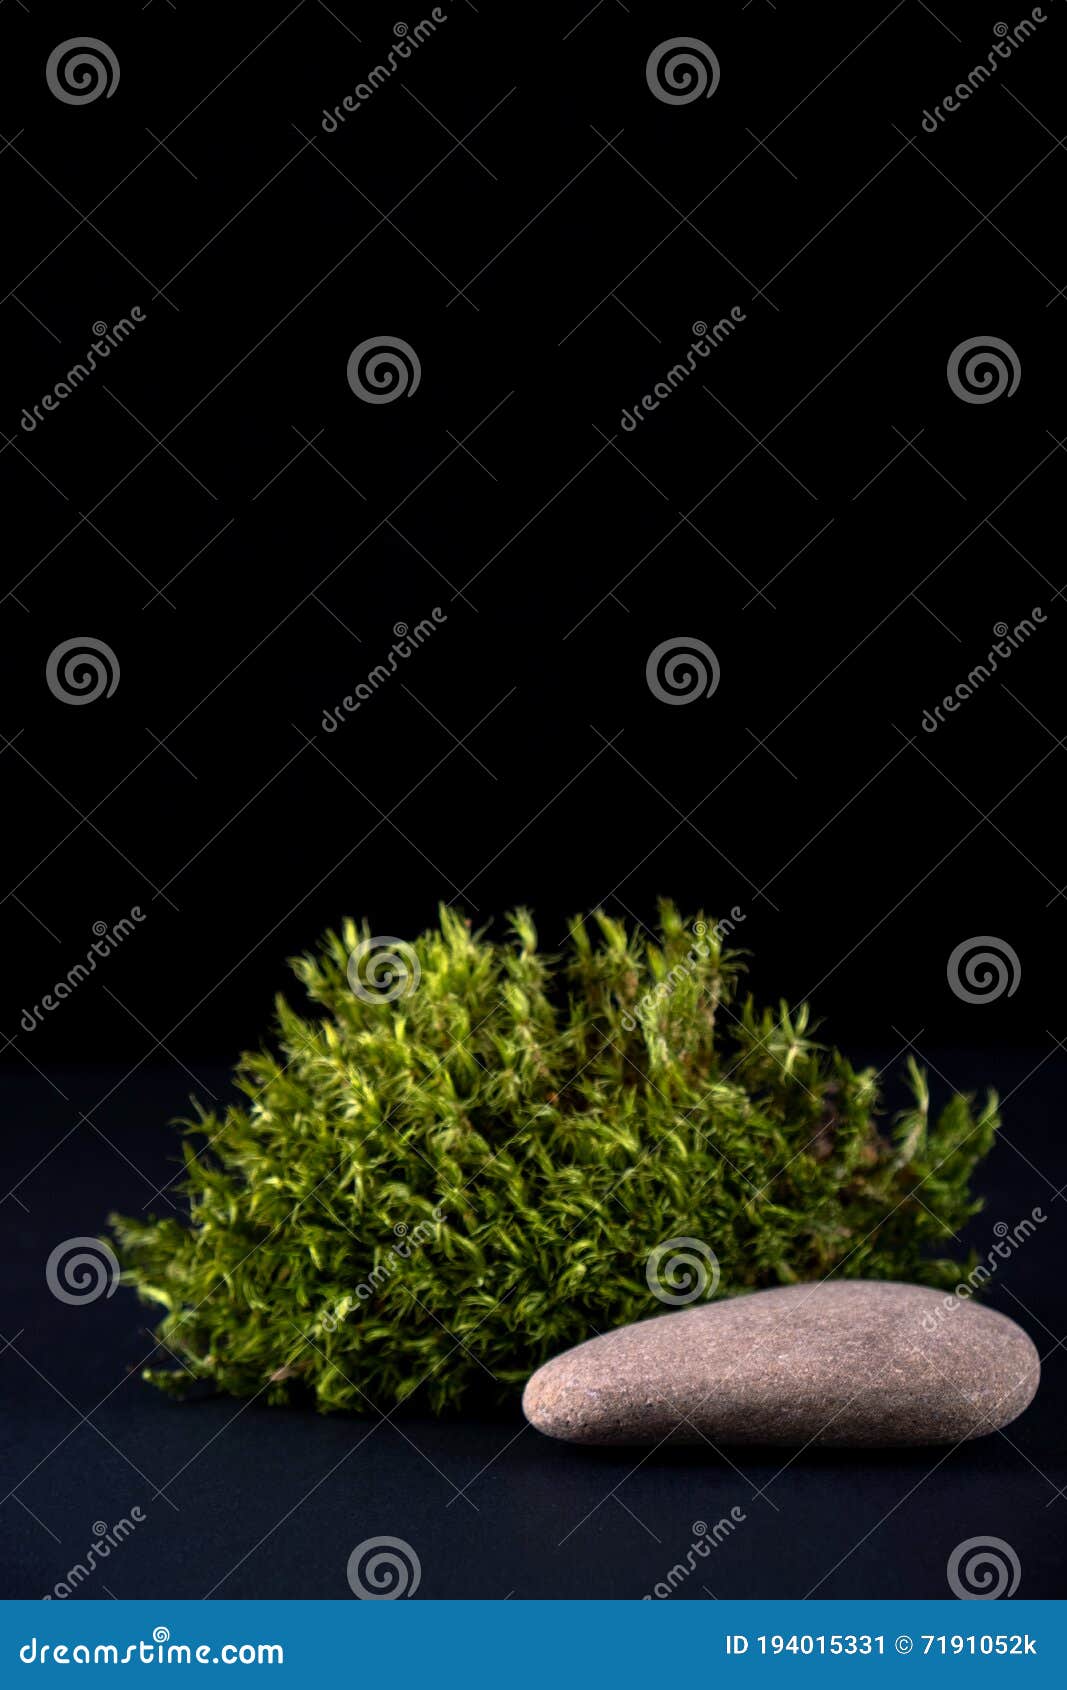 abstract background with moss  and stone podium for products presentation or exhibitions.  concept for natural cosmetic